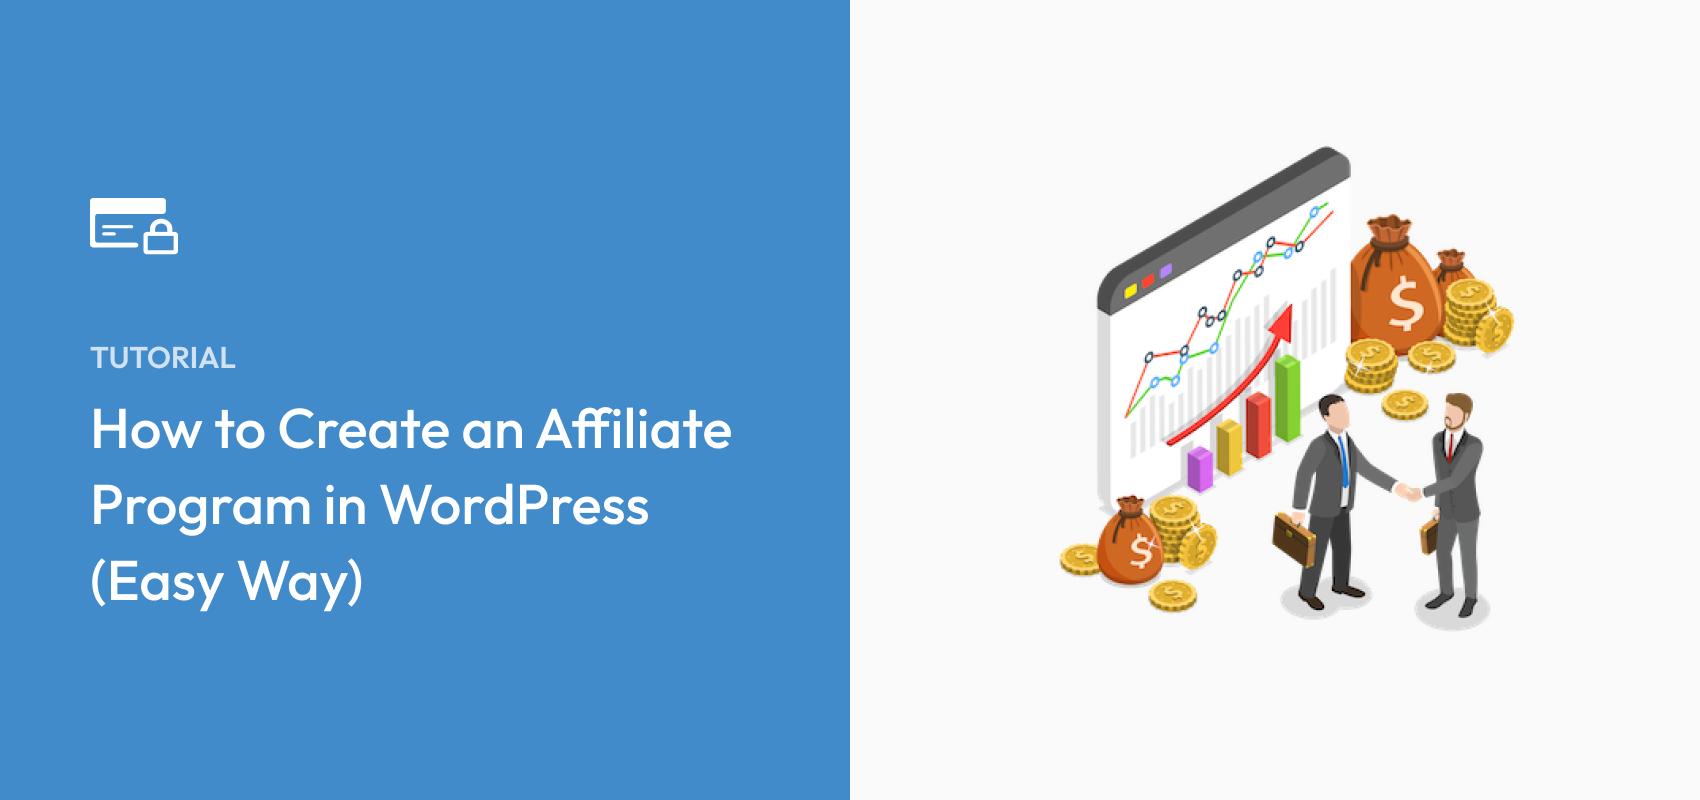 How to Create an Affiliate Program in WordPress (Easy Way)